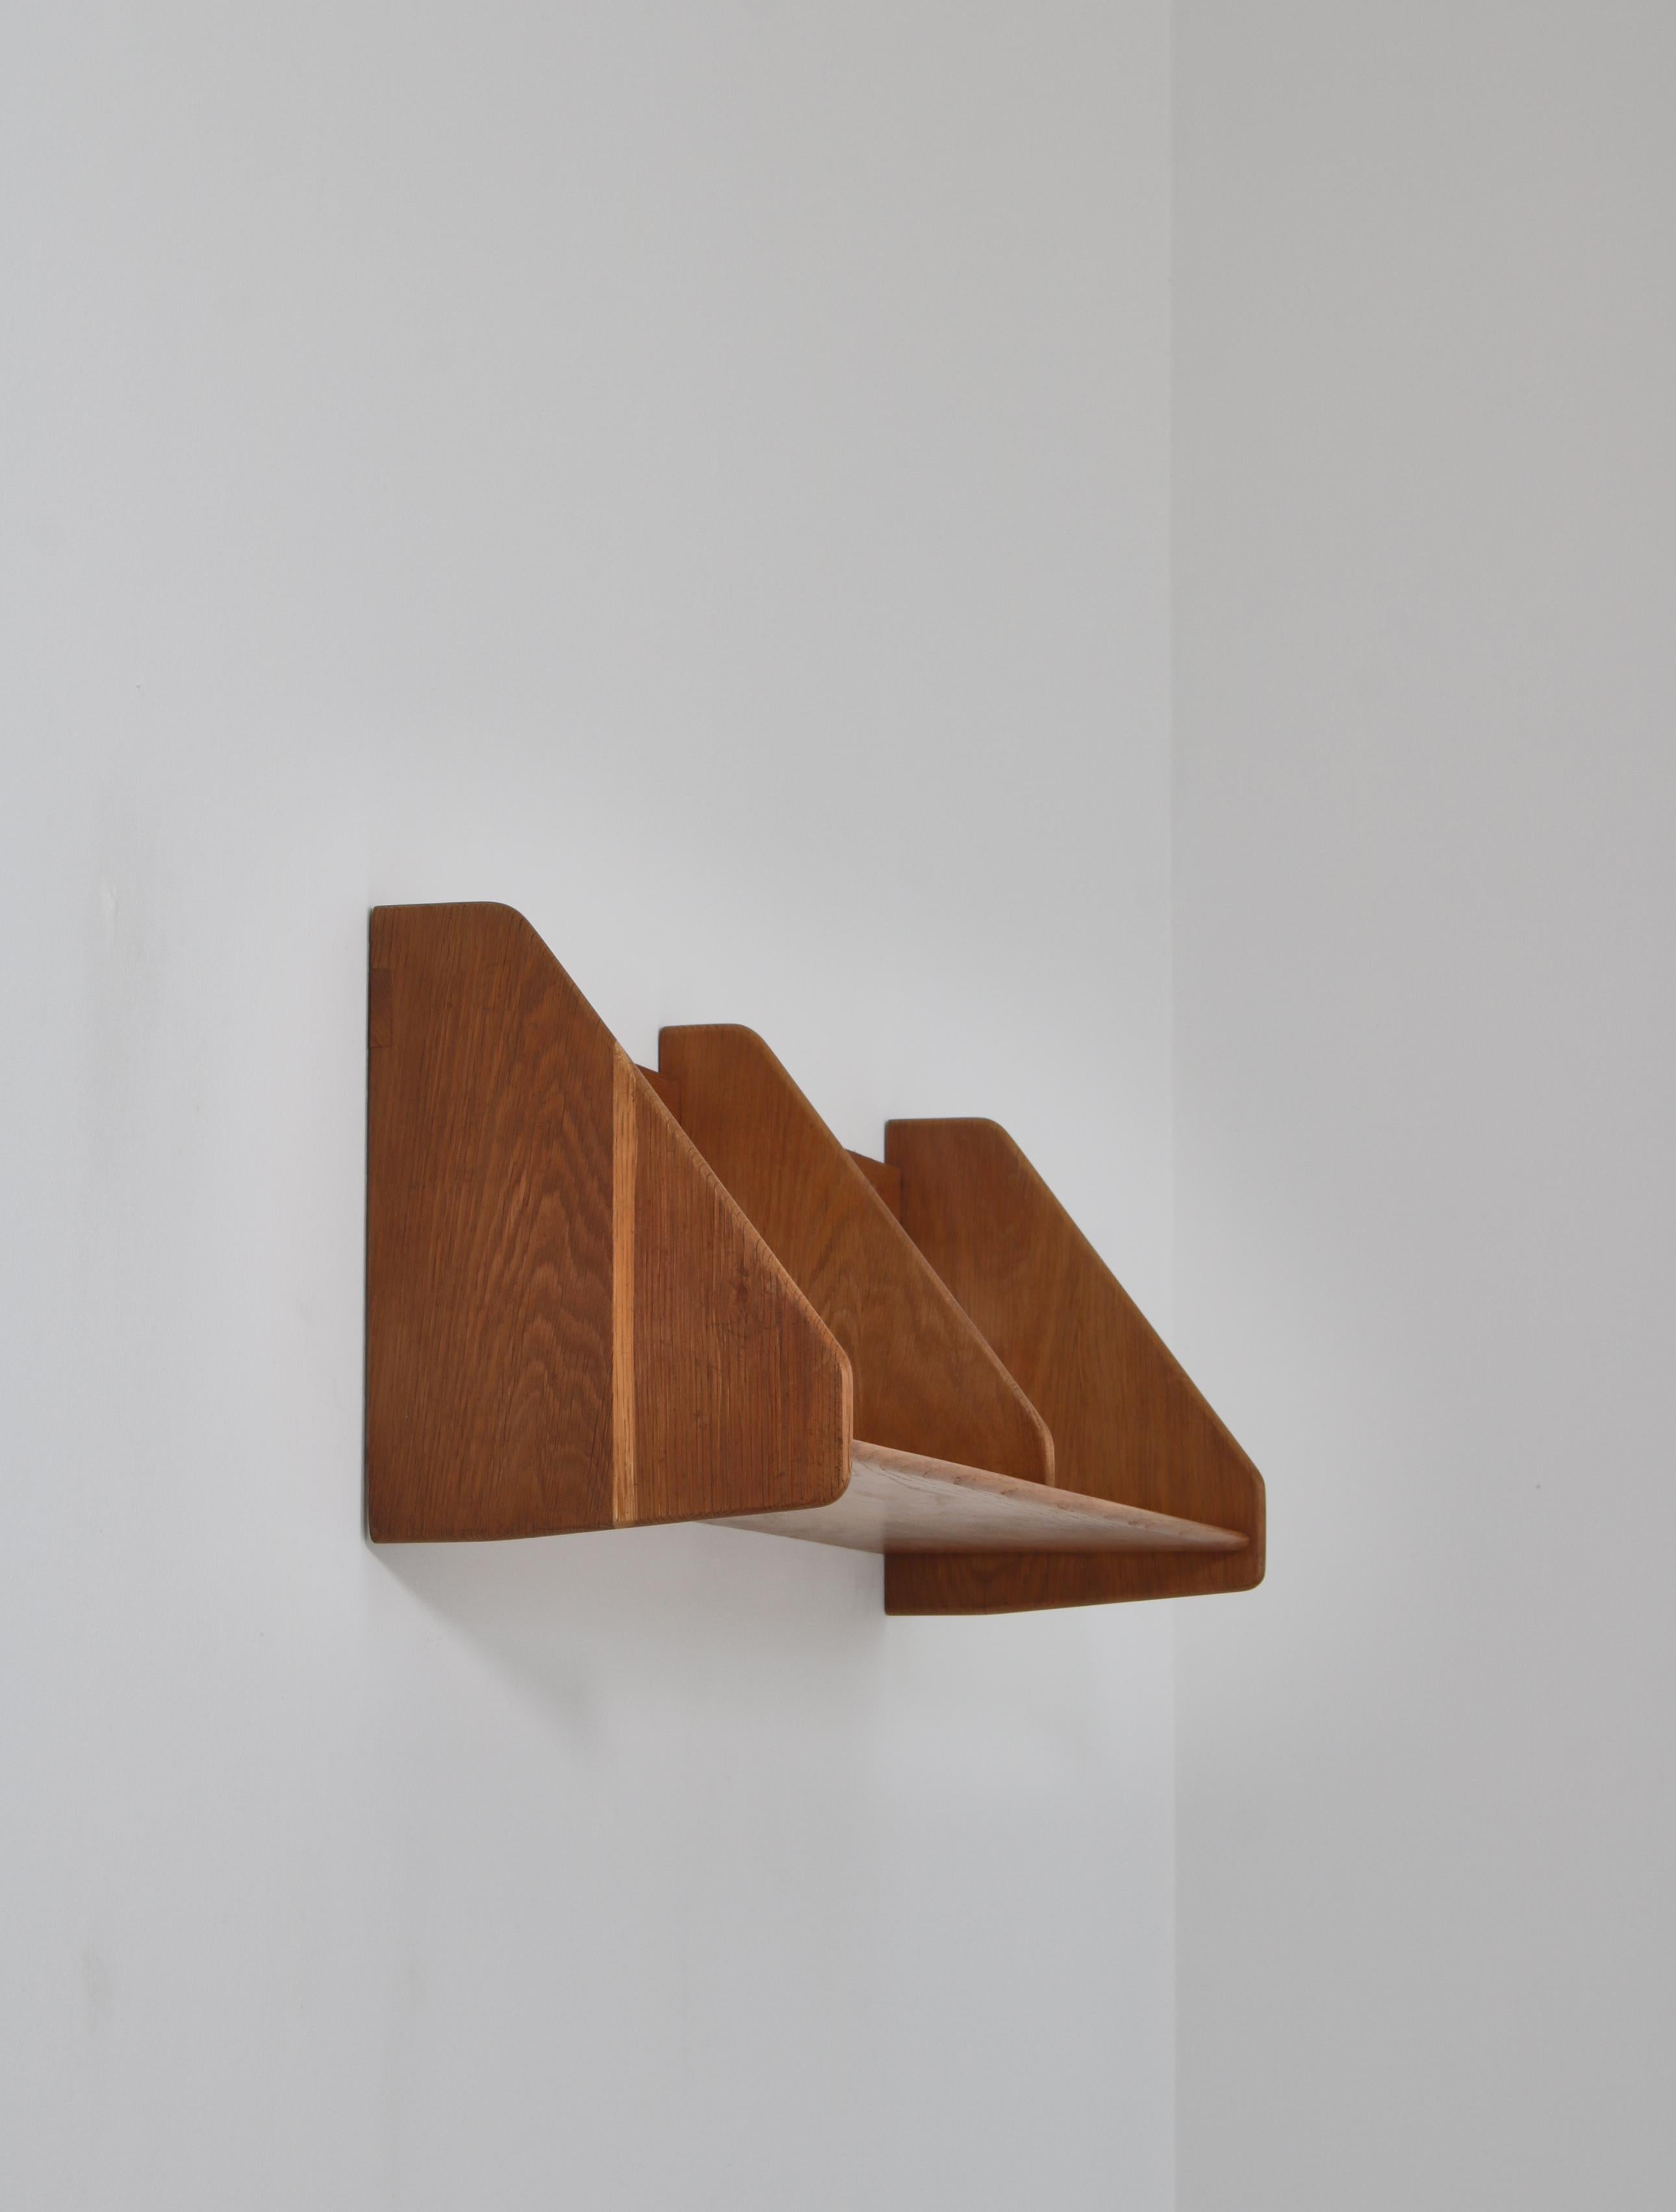 Rare wall shelf made at Ry Mobler in Denmark in the 1950s. The shelf was designed by Hans J. Wegner and is made from solid Danish oak.